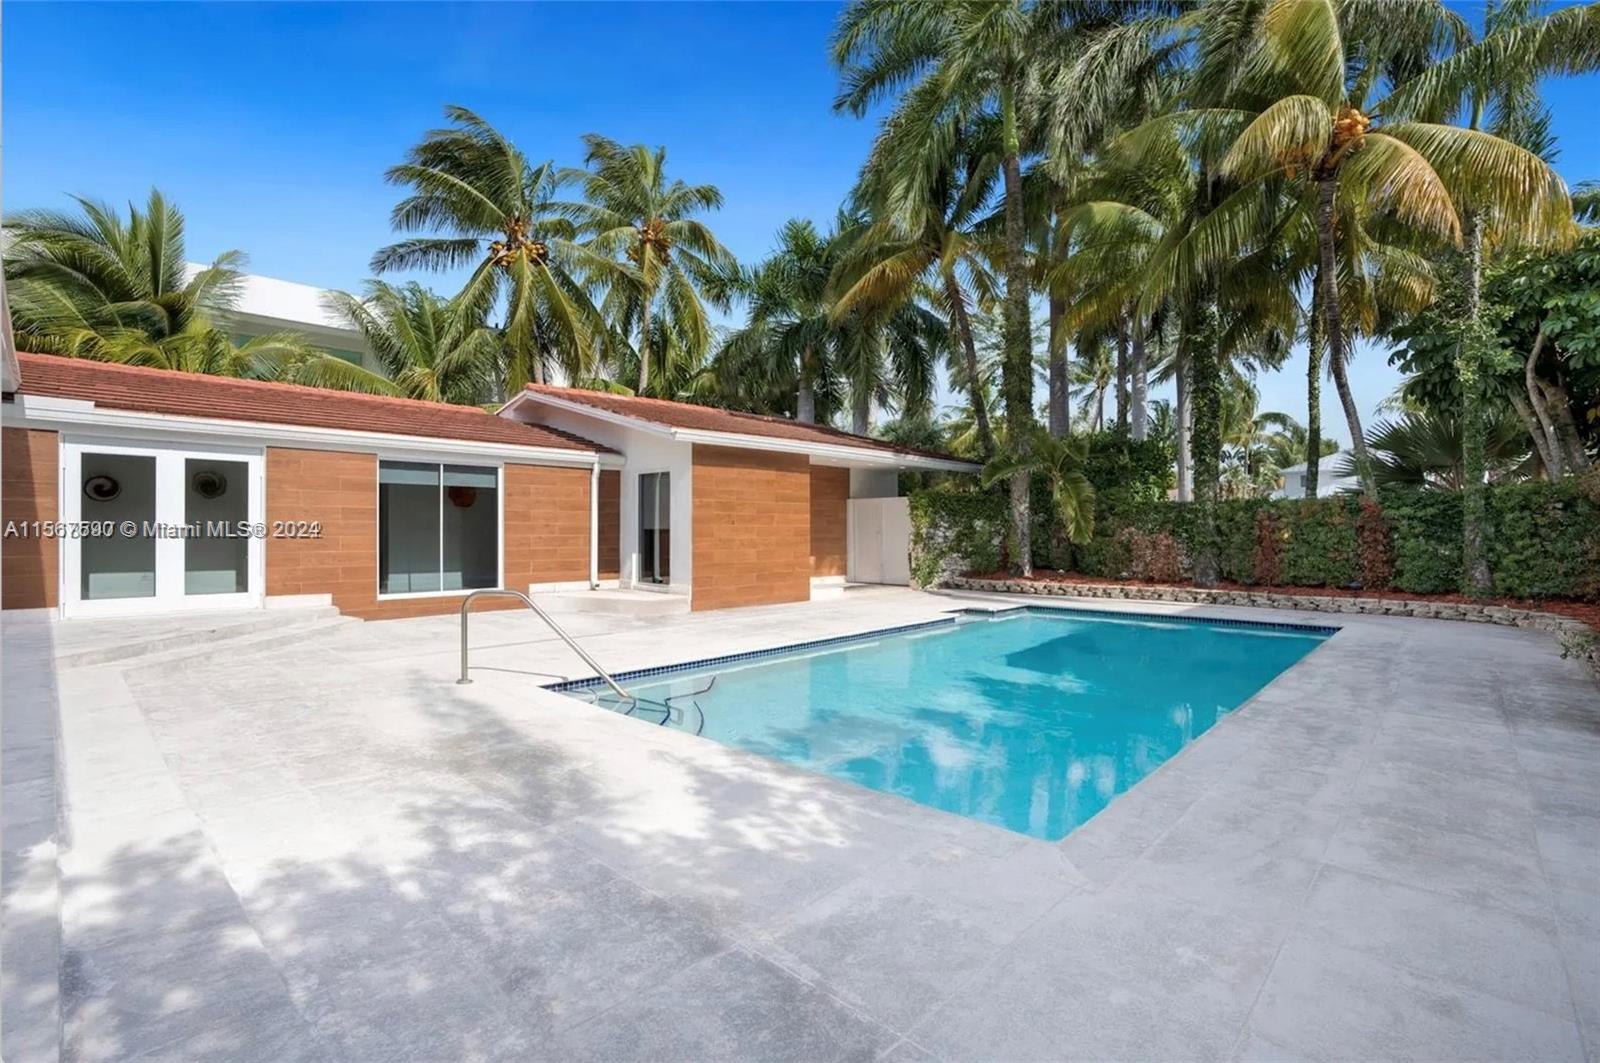 Property for Sale at Address Not Disclosed, Golden Beach, Miami-Dade County, Florida - Bedrooms: 4 
Bathrooms: 4  - $3,800,000